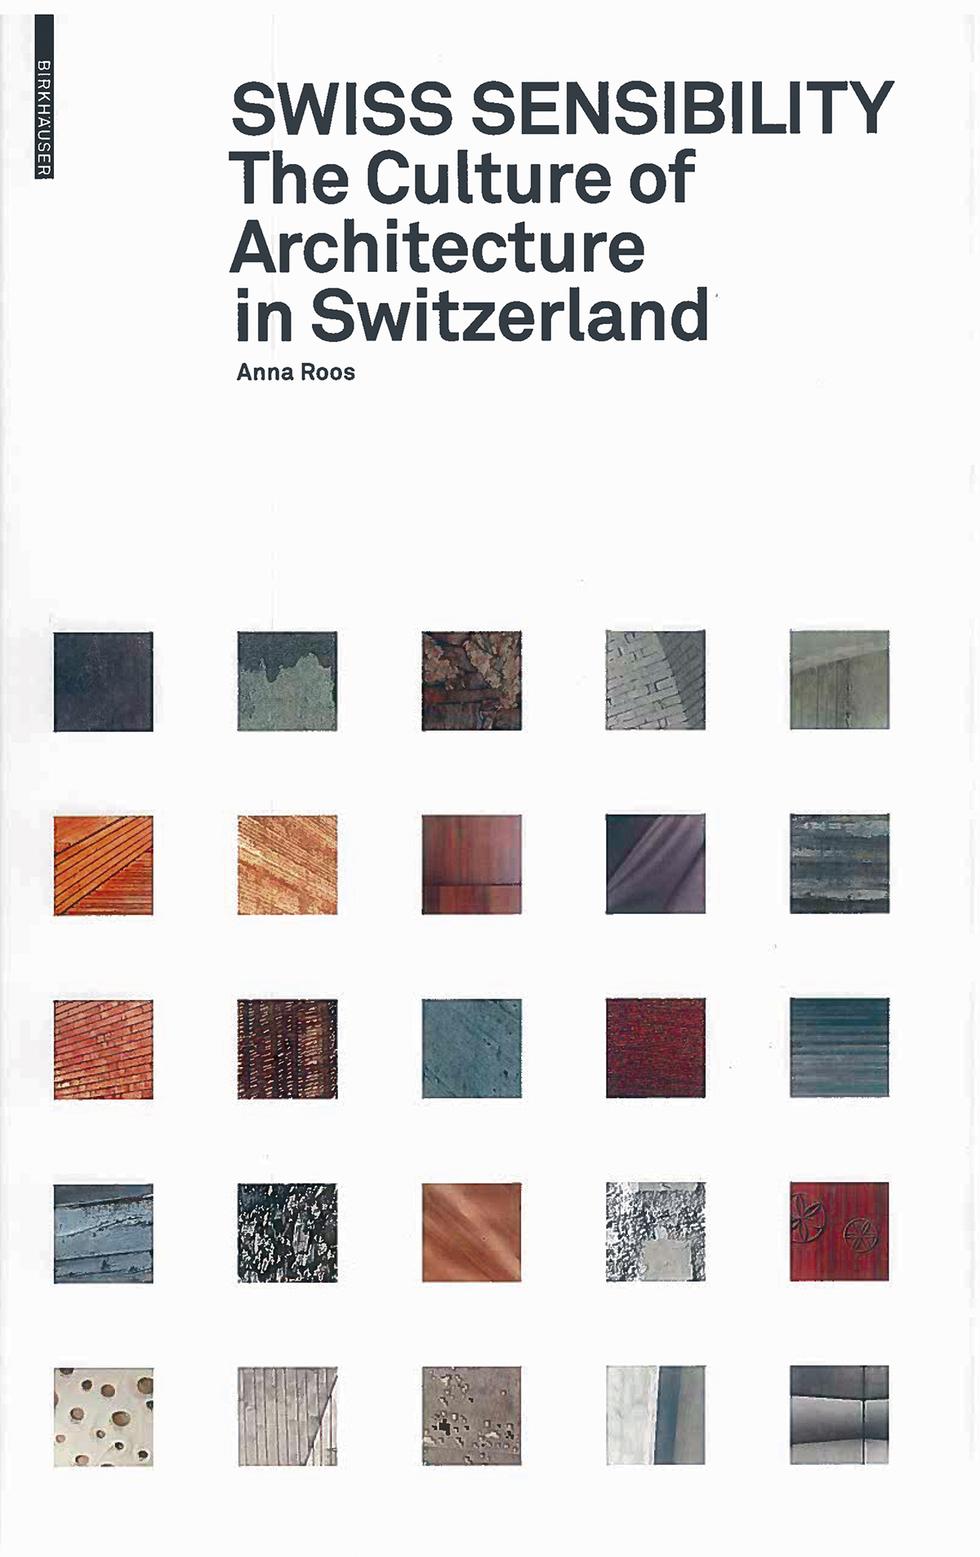 Swiss Sensibility. The Culture of Architecture in Switzerland